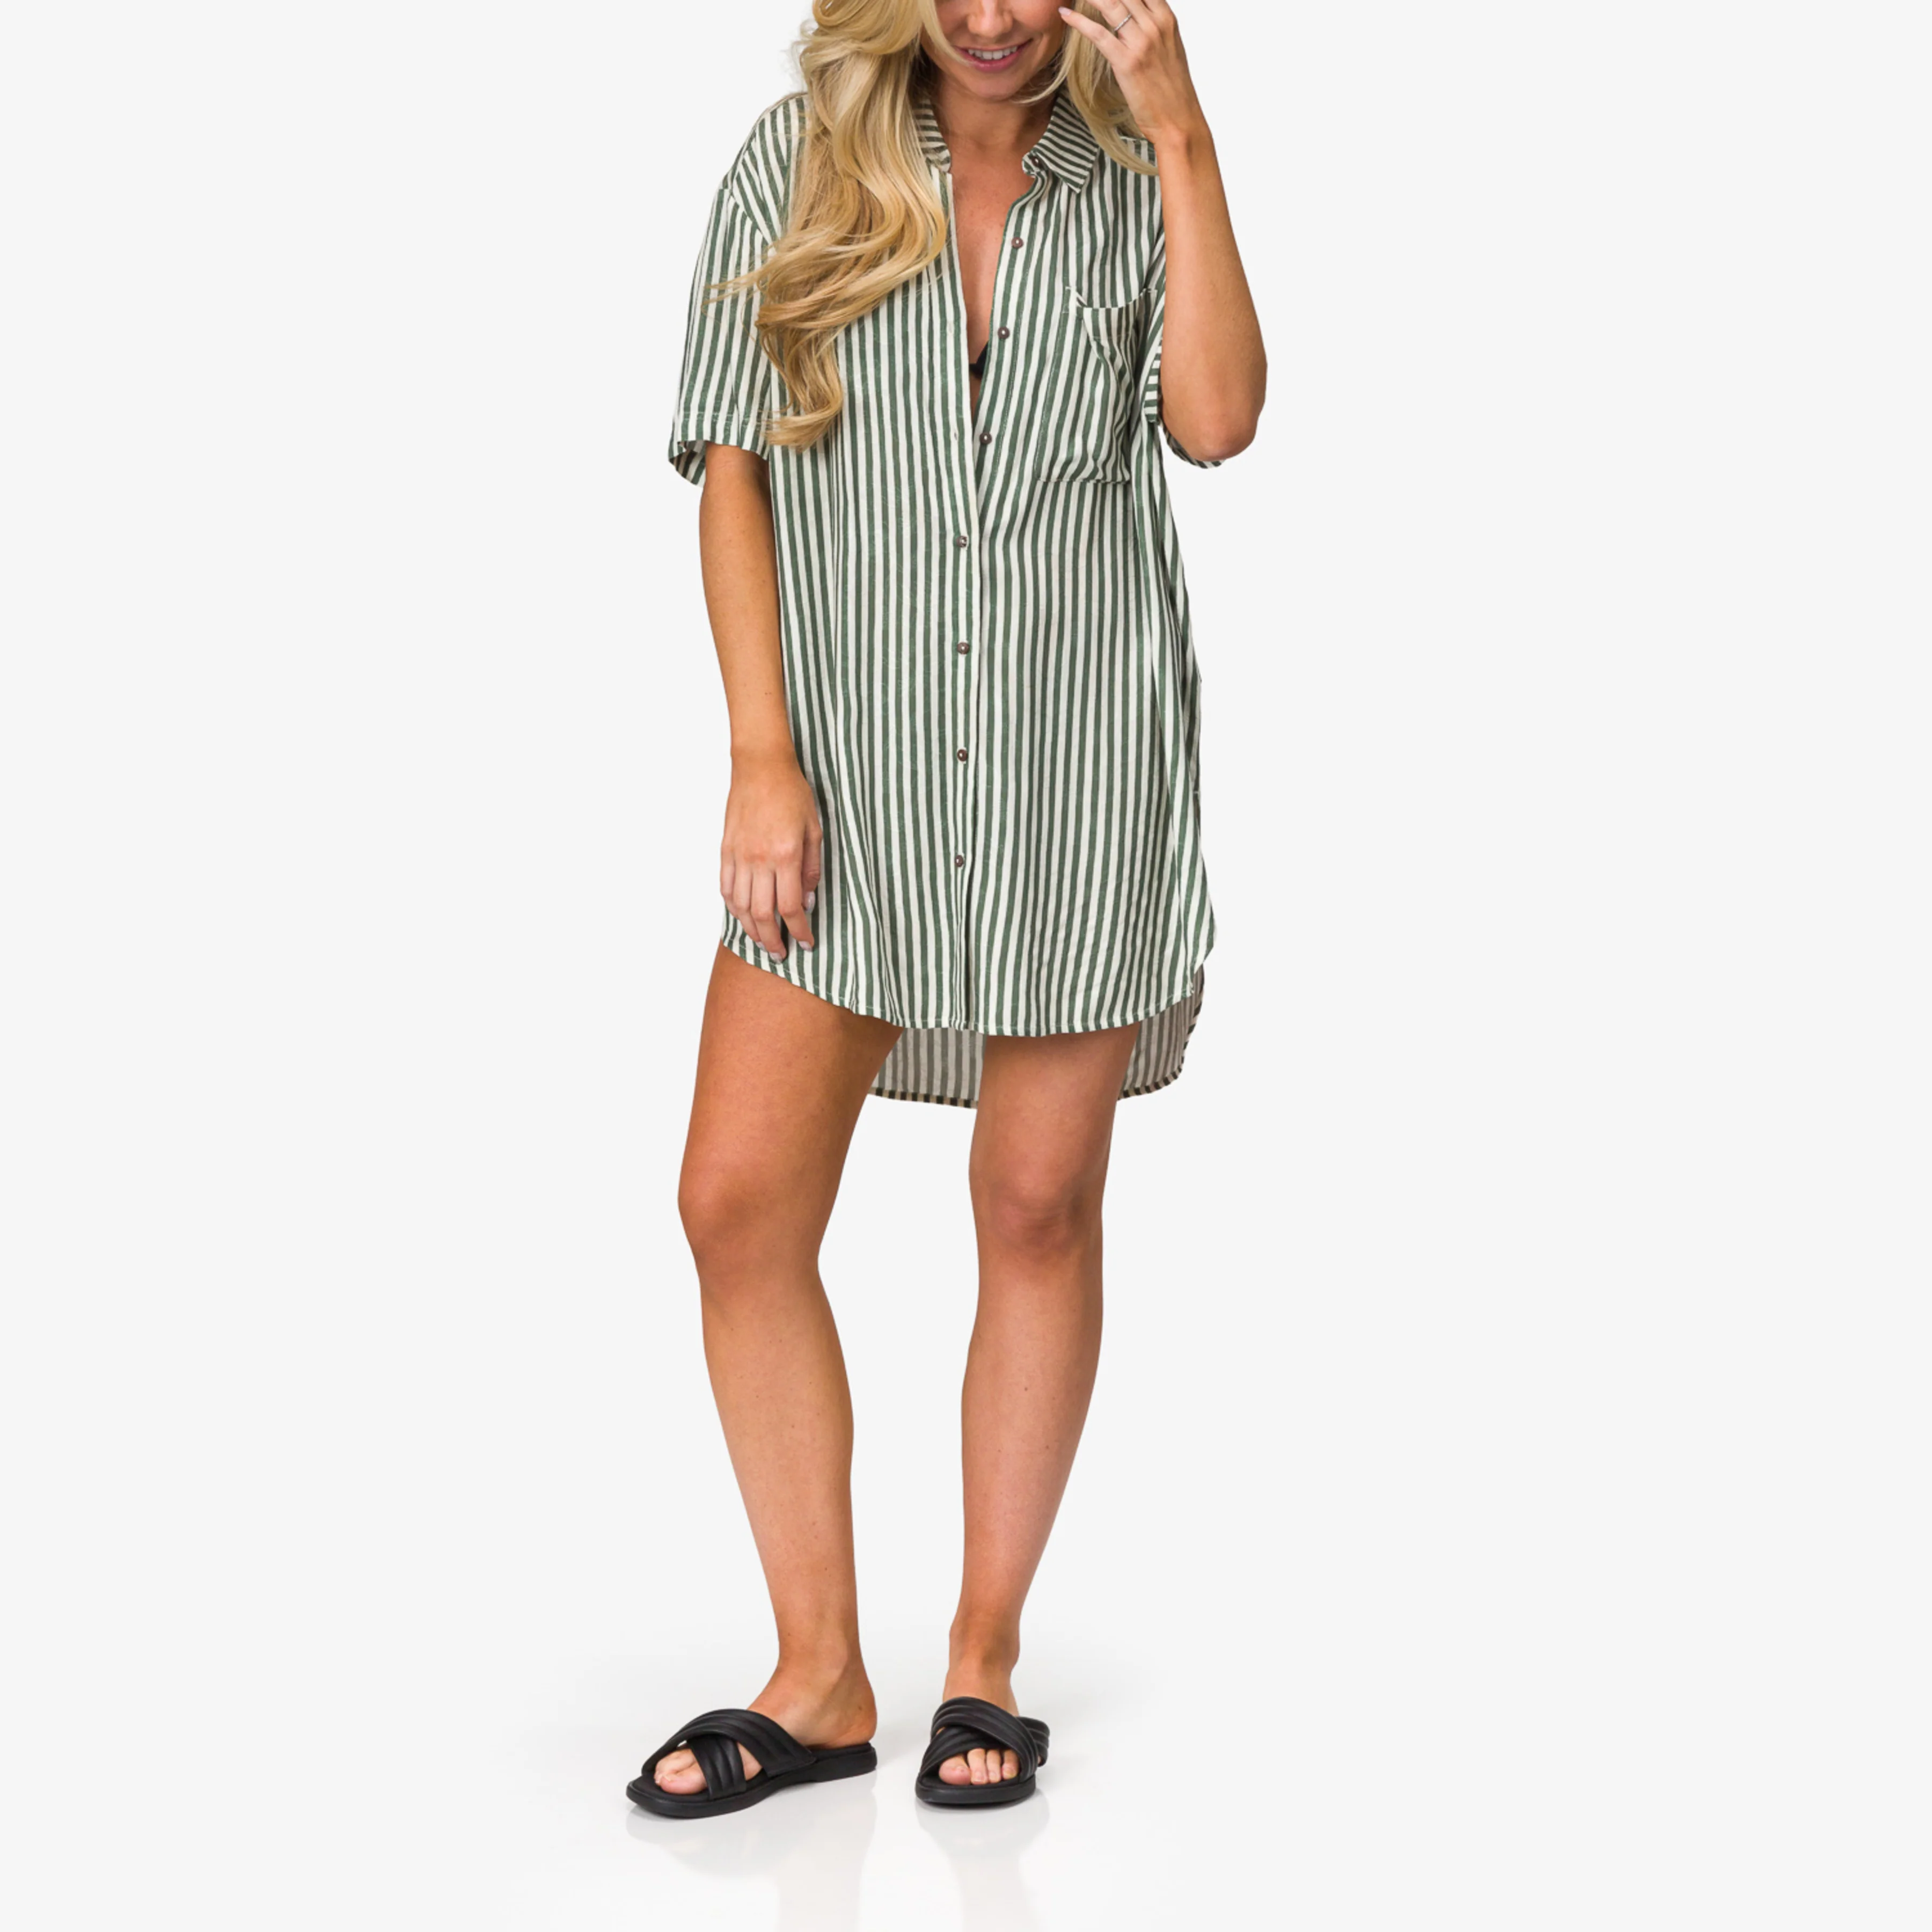 Womens green and white vertical striped shirt